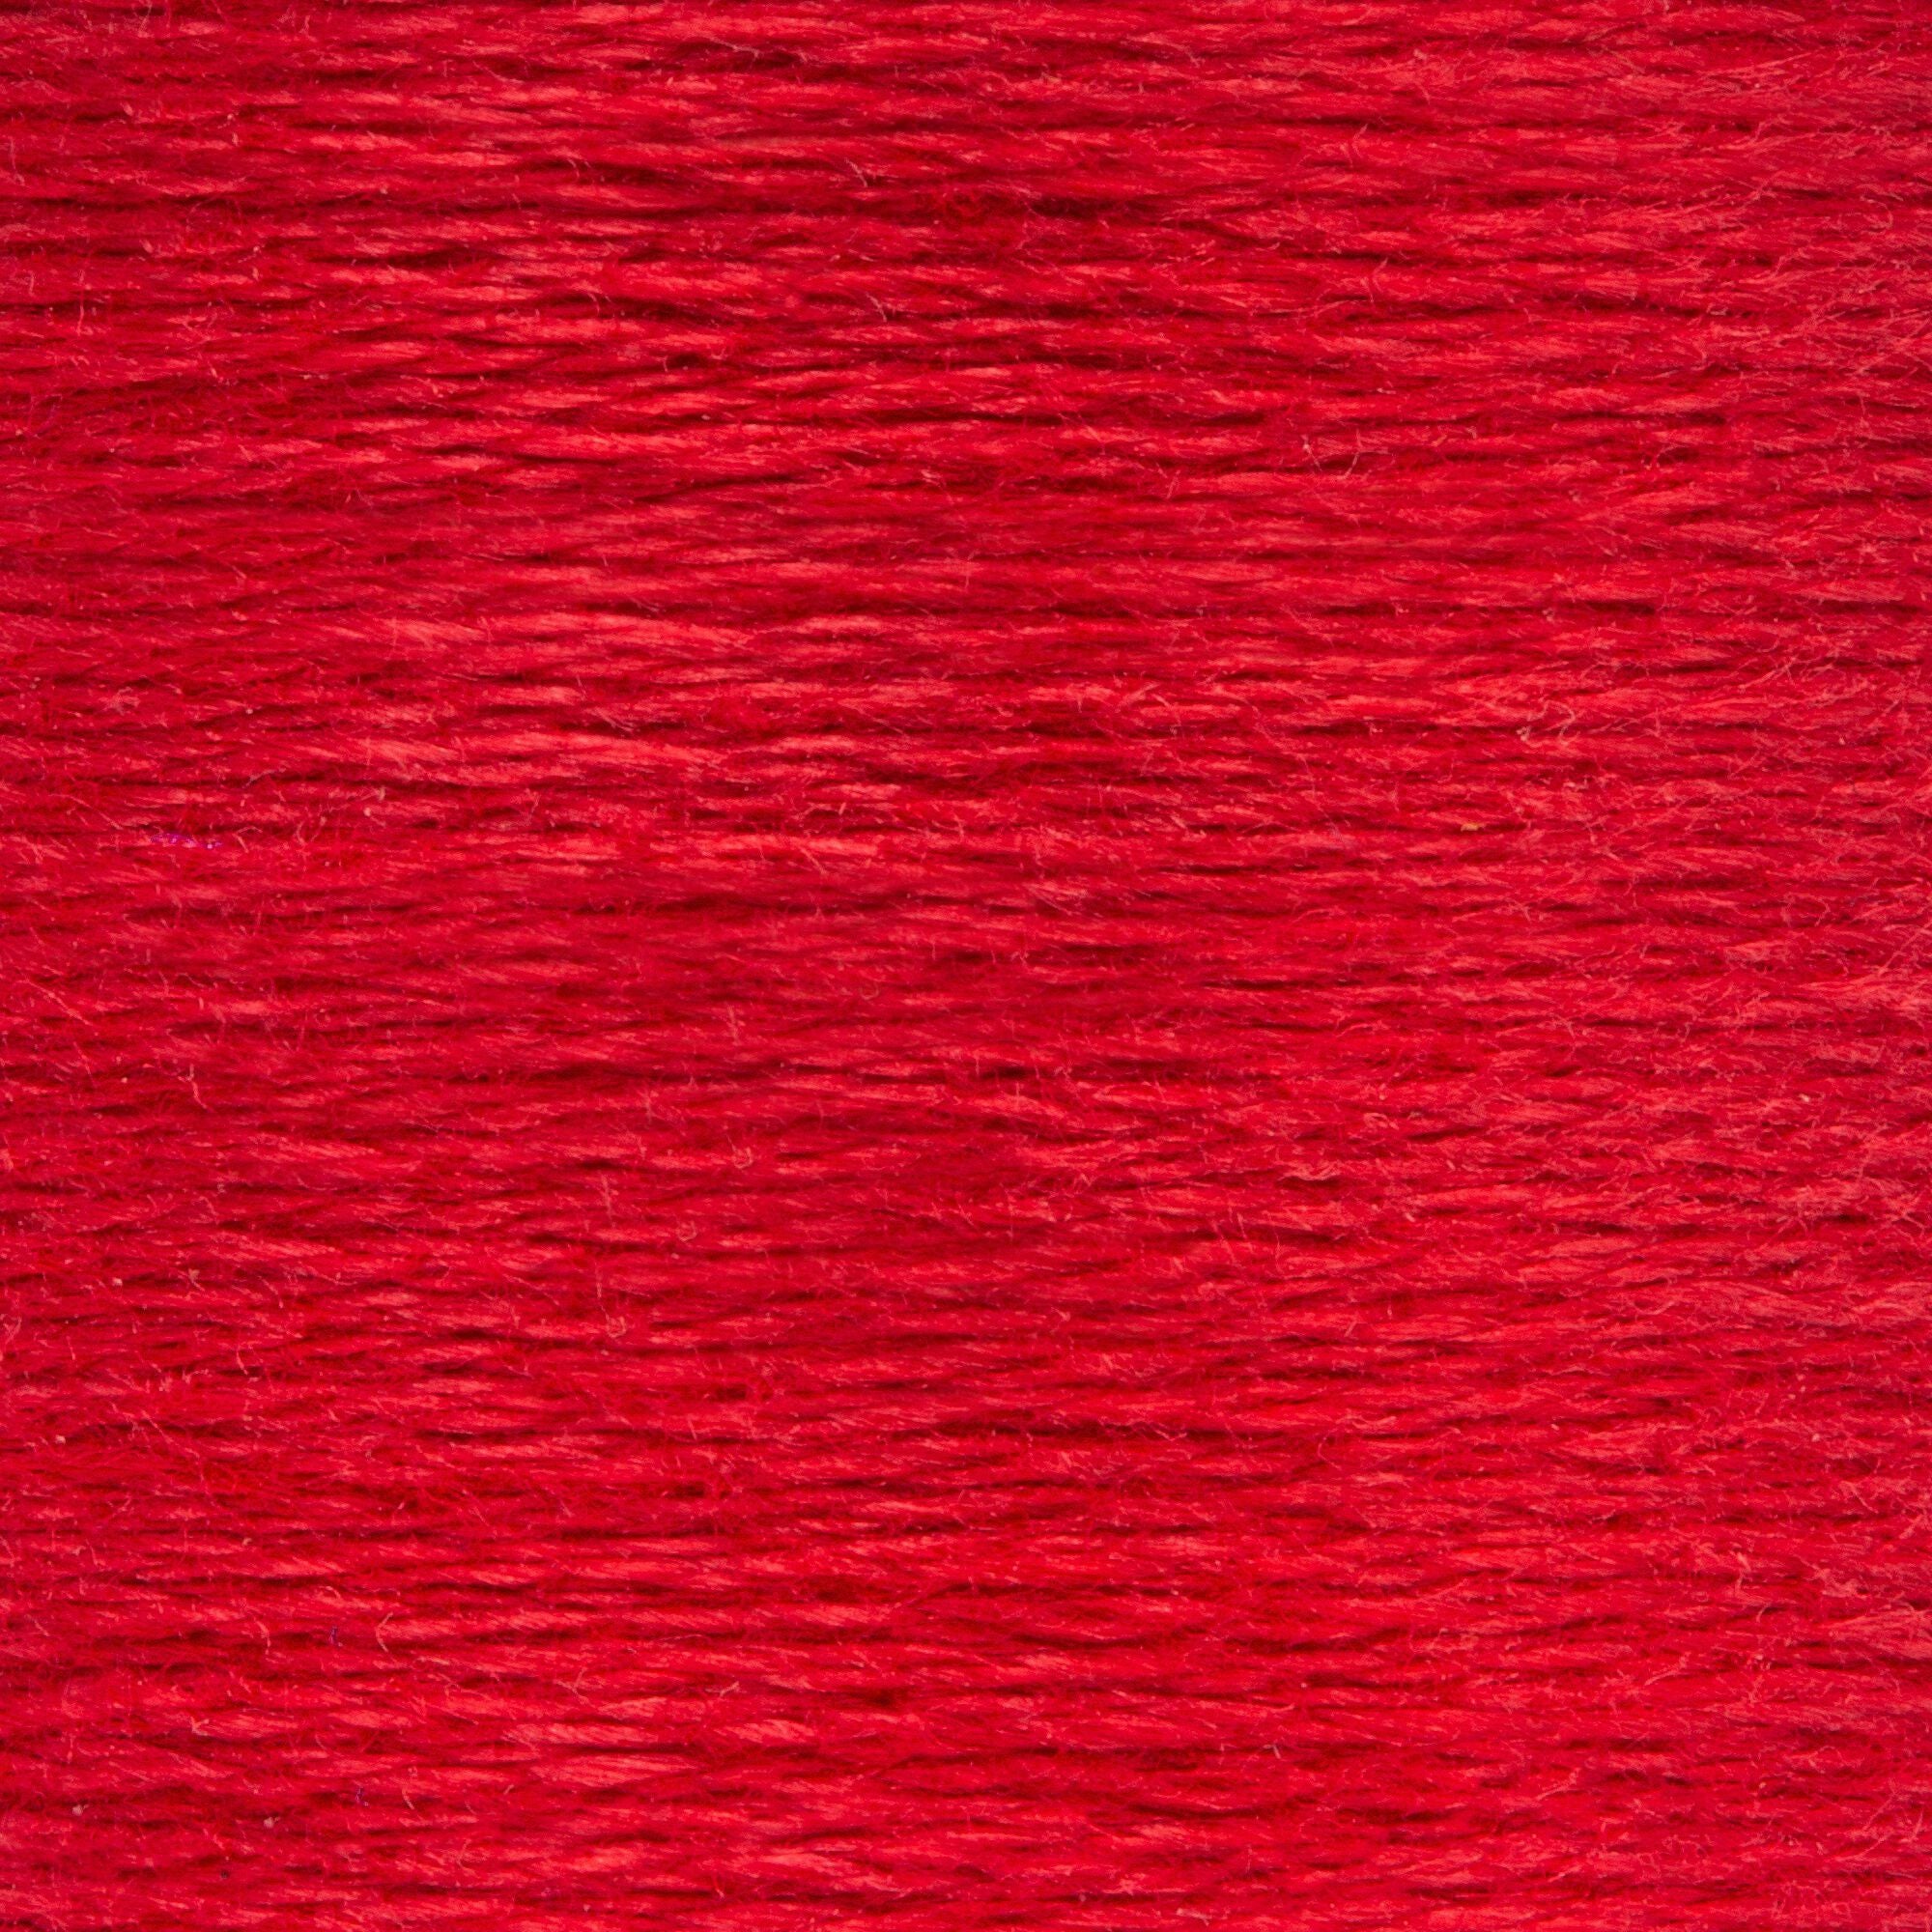 Anchor Embroidery Floss in Burgundy Med